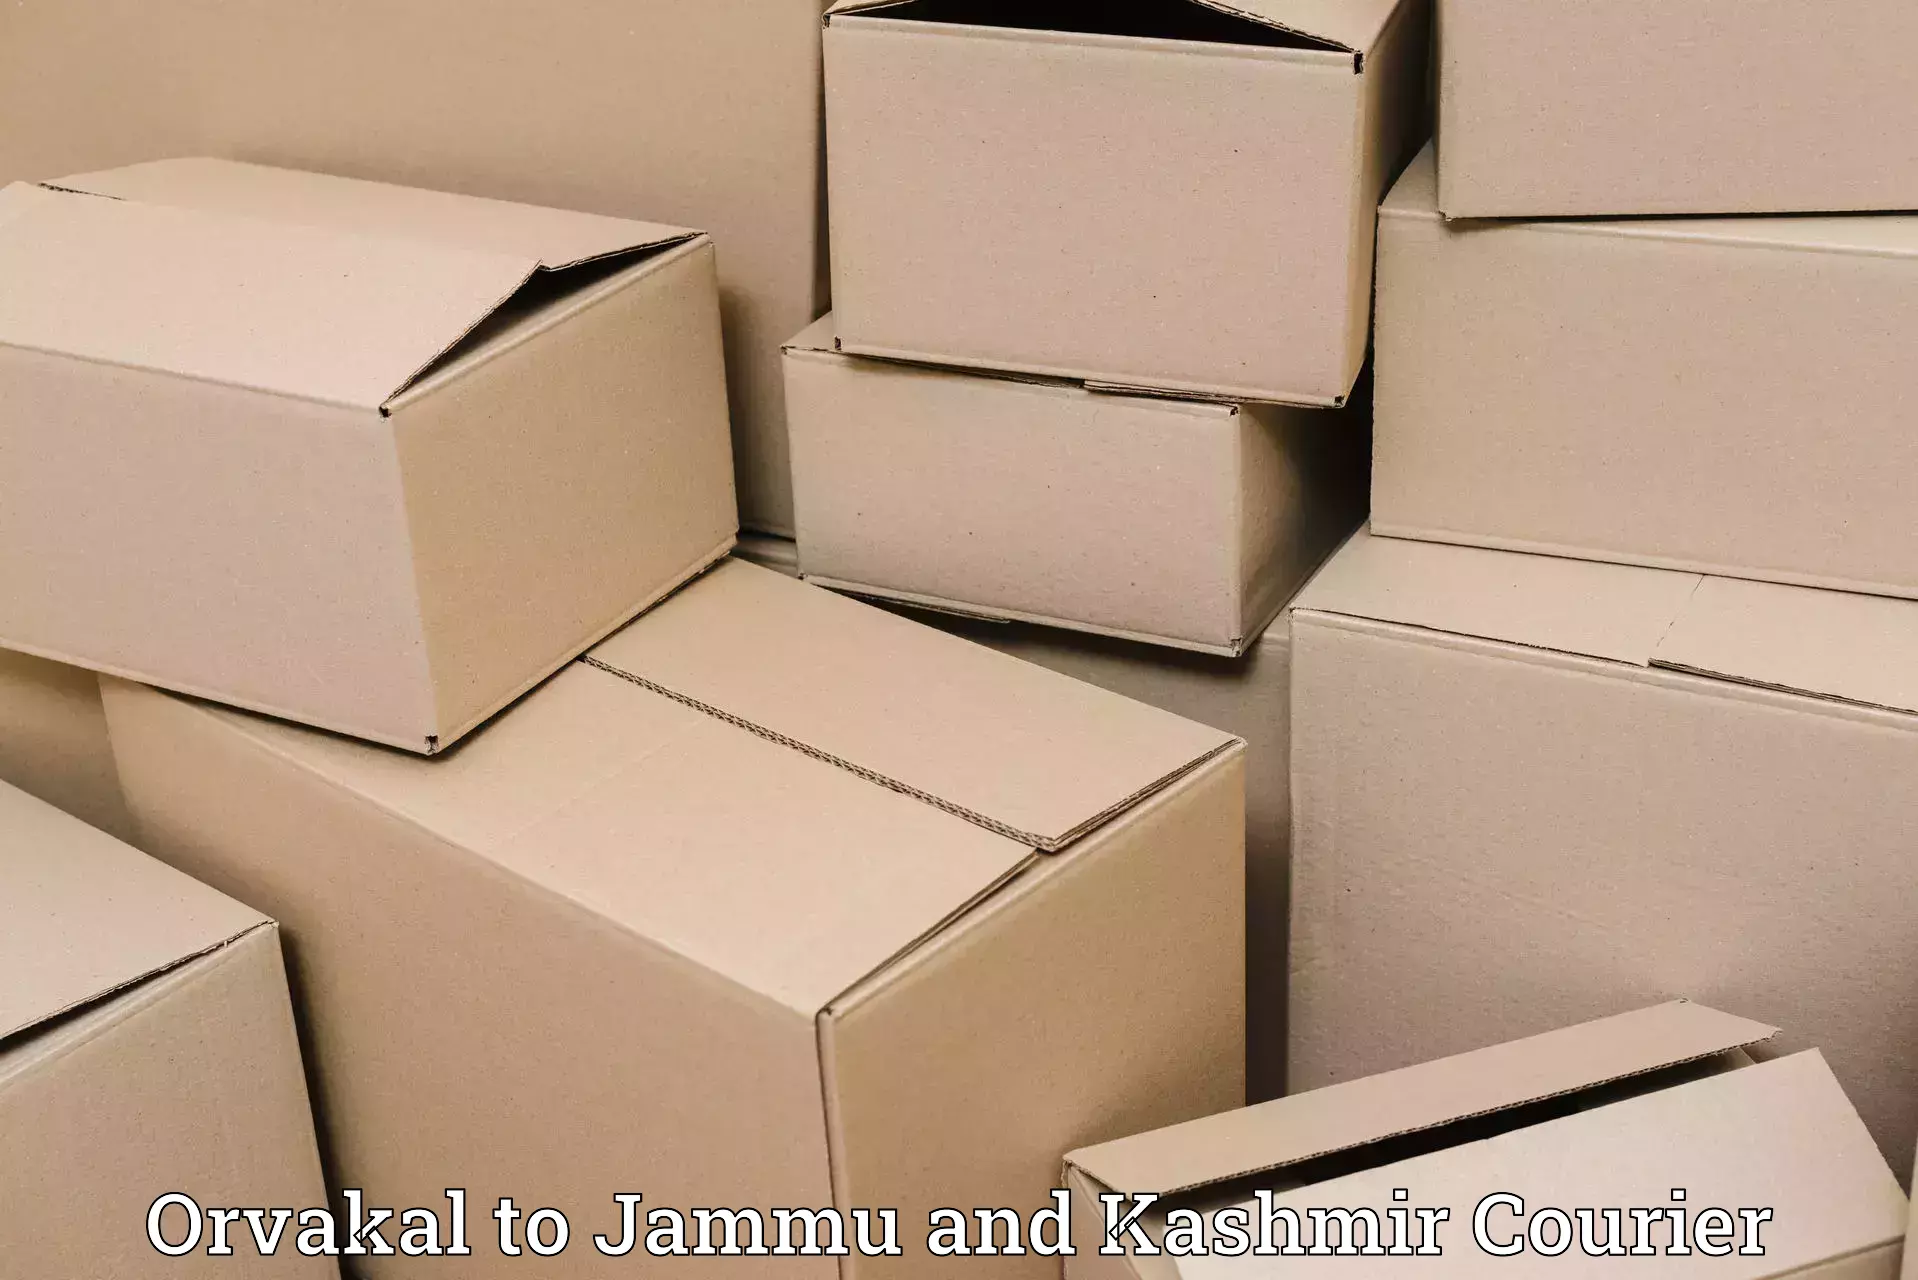 Cargo delivery service Orvakal to Baramulla